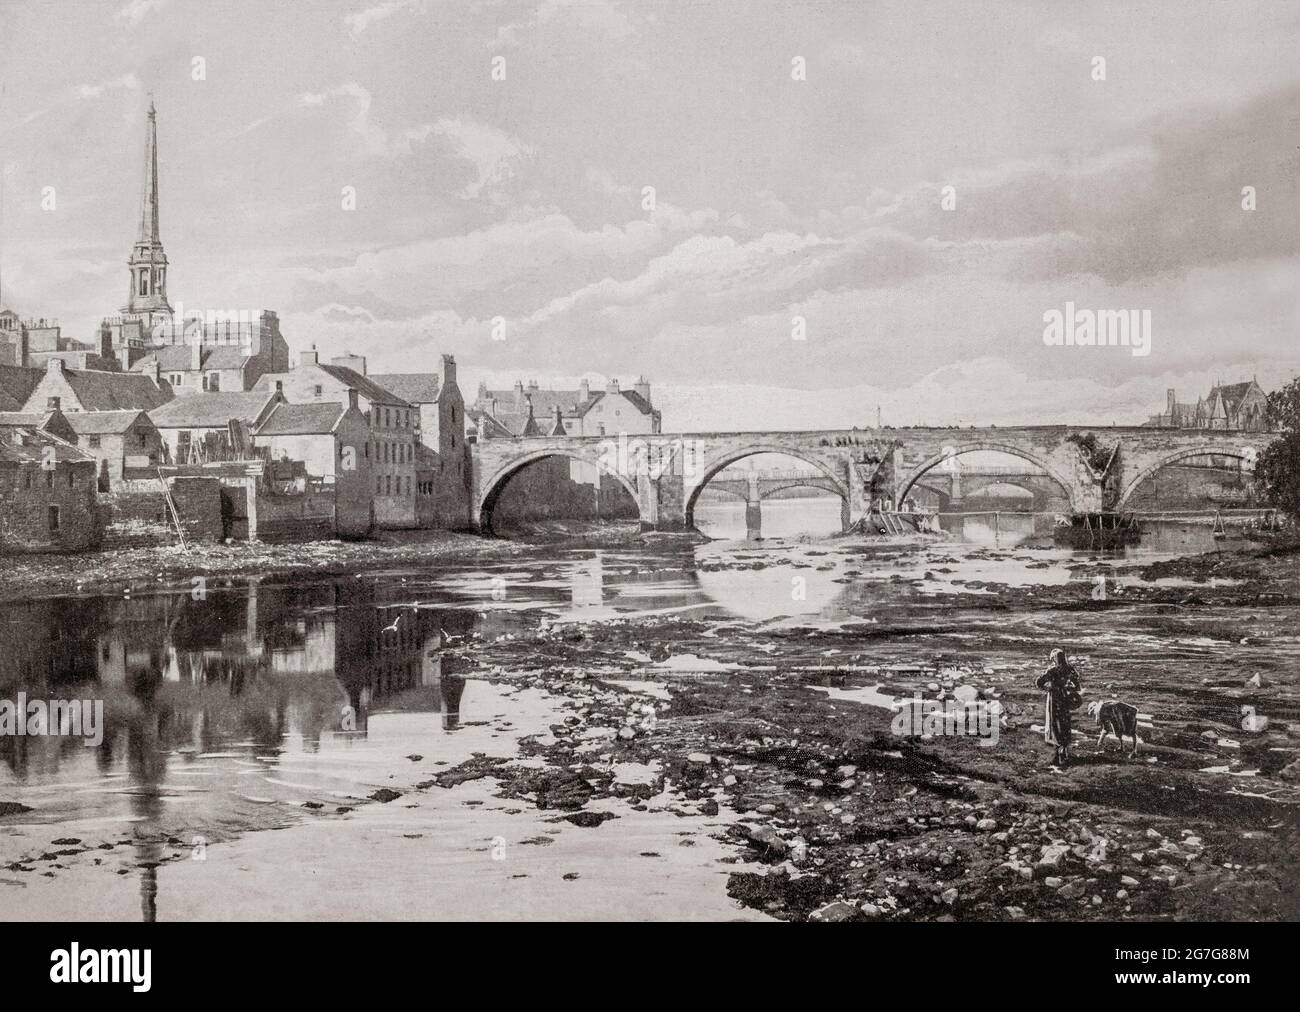 A late 19th century view of the Twa Bridges of Ayr, Scotland. The 'Auld Brig' served as the sole river crossing in Ayr for over three centuries and construction of the New Bridge commenced in the autumn of 1786. It was while the new bridge was under construction that Robert Burns' famous poem, 'The Brigs of Ayr' was written in 1787 that truly immortalized the 'Auld Brig'. The new bridge was opened the following year. Stock Photo